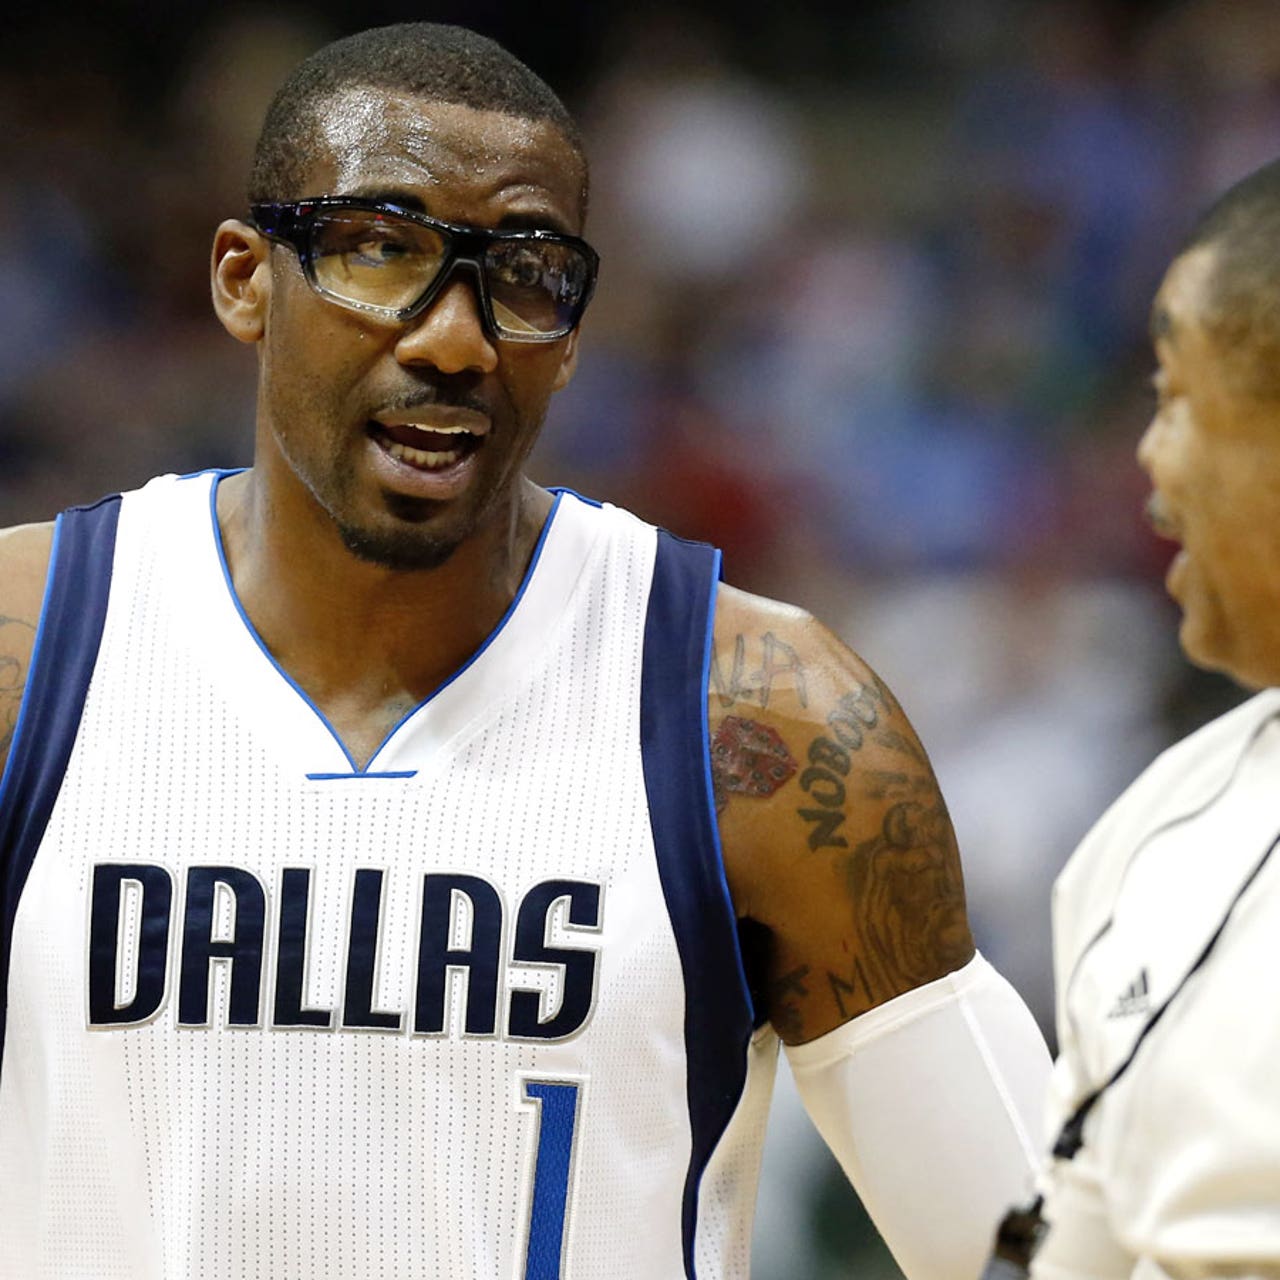 Amar'e Stoudemire Made So Much Money in the NBA That He Bought Part of a  Basketball Team